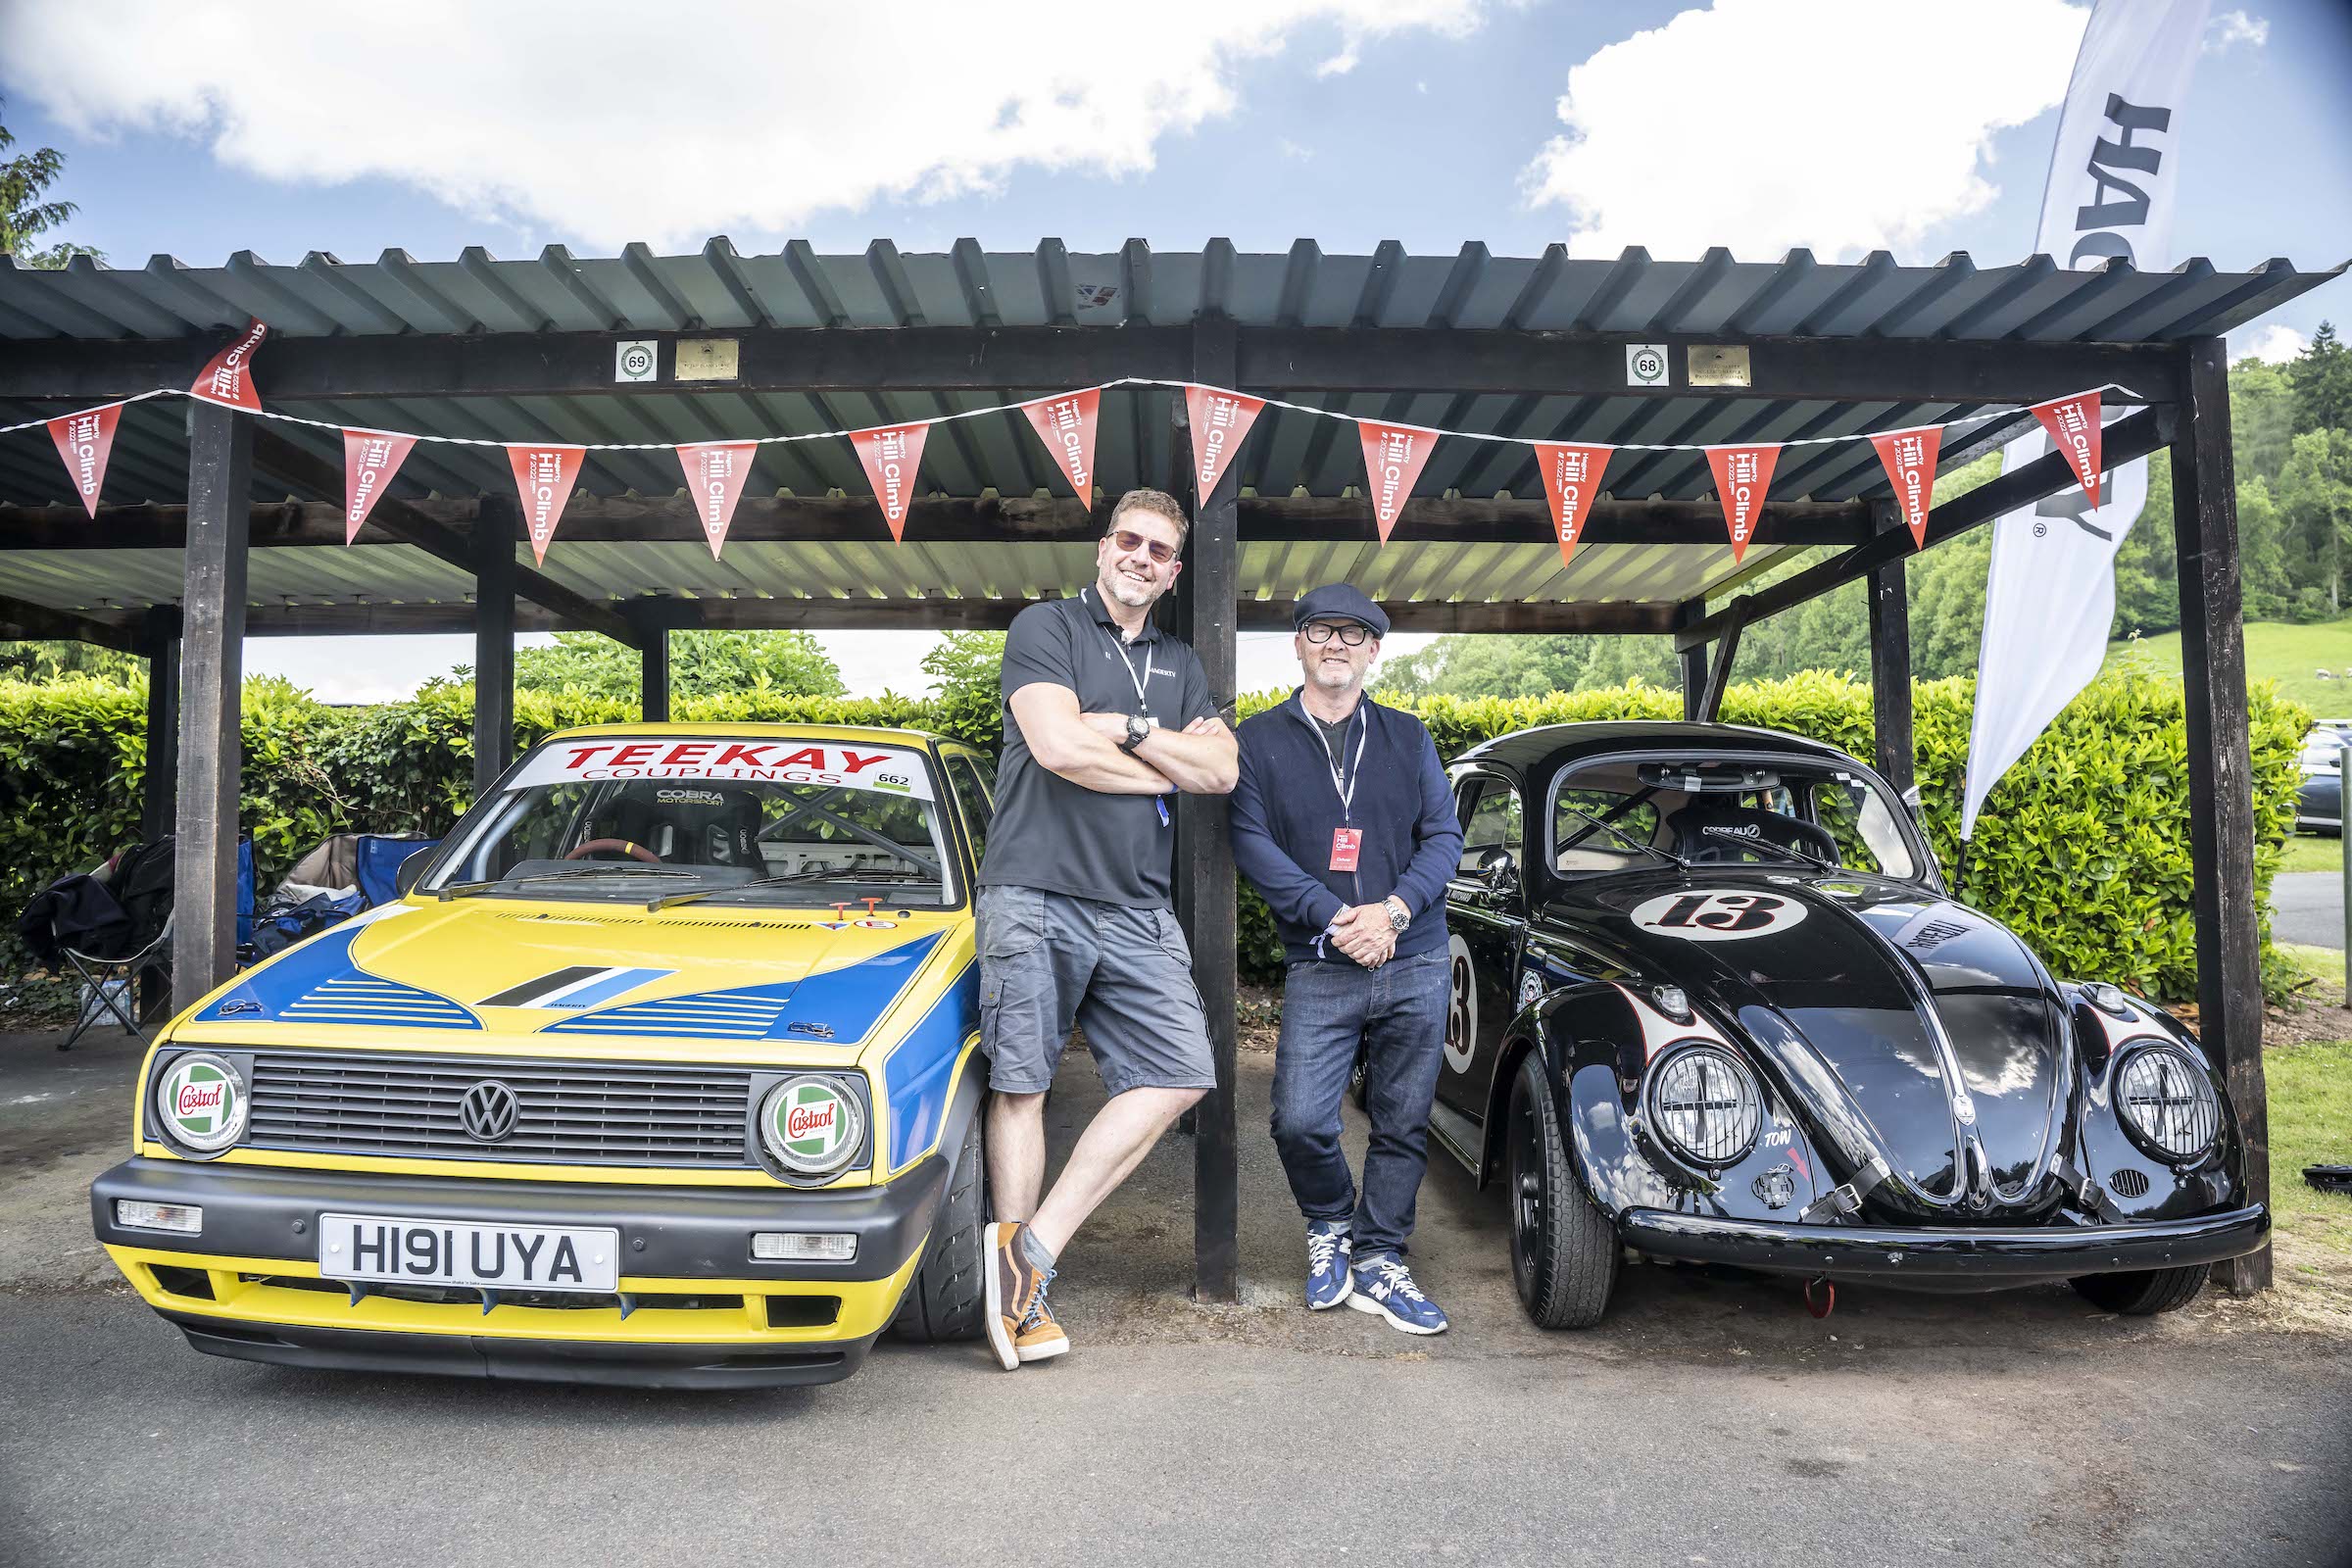 “Let’s settle this on the hill!” Paul Cowland and Drew Pritchard go head-to-head in their Golf GTI and VW Beetle